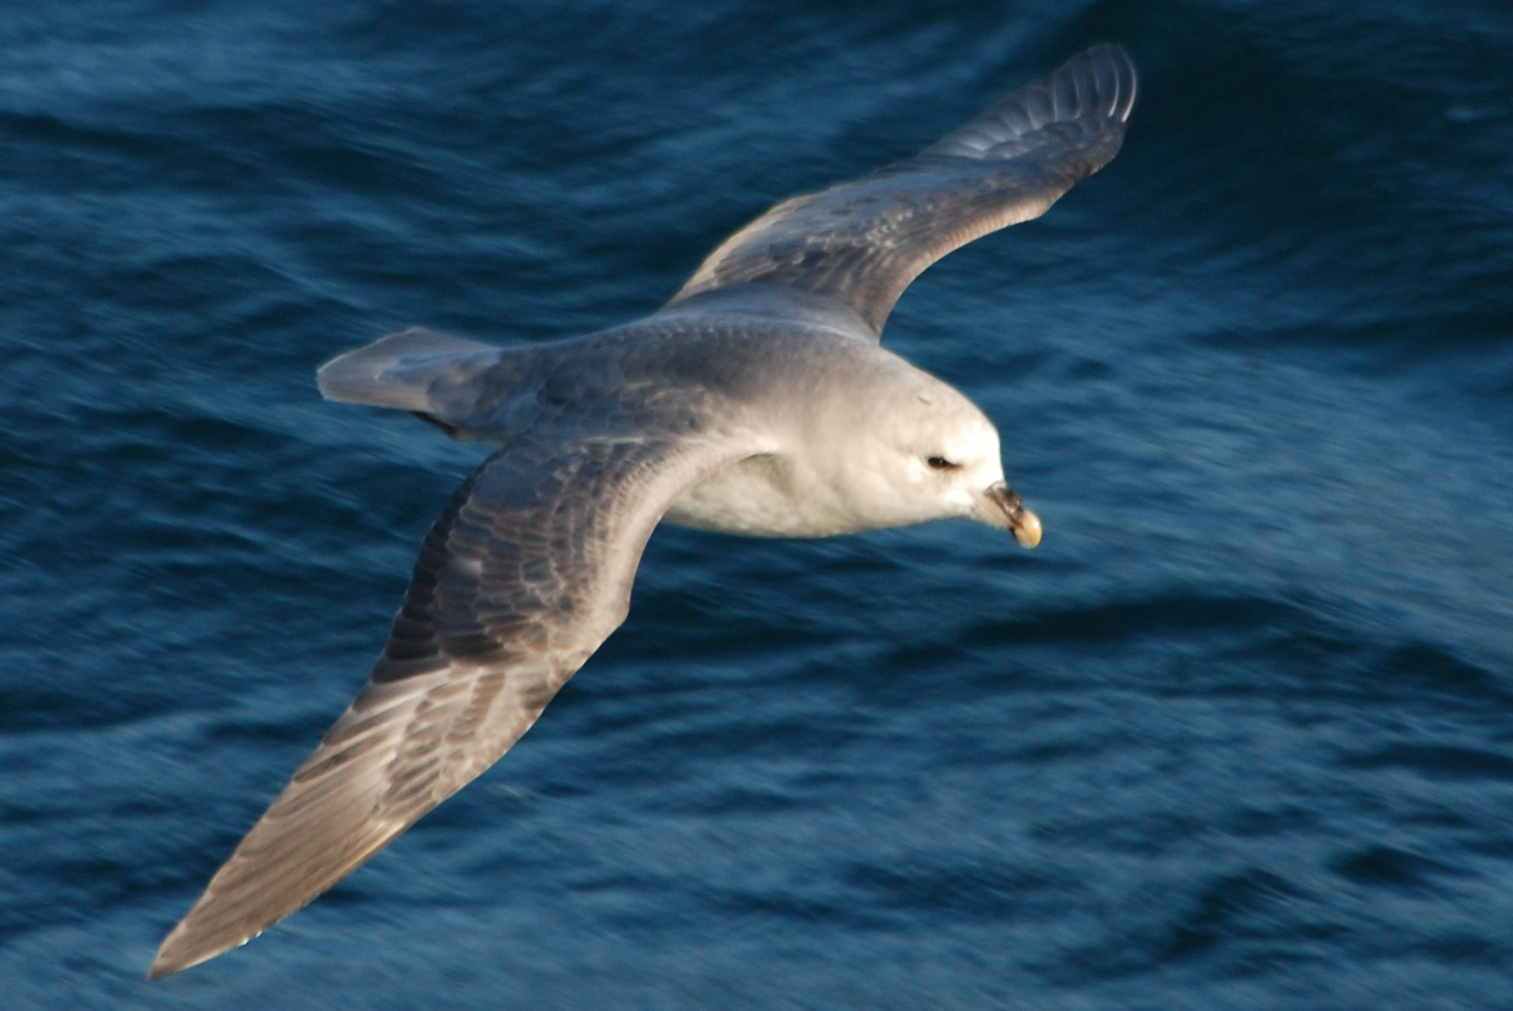 Click picture to see more Northern Fulmars.